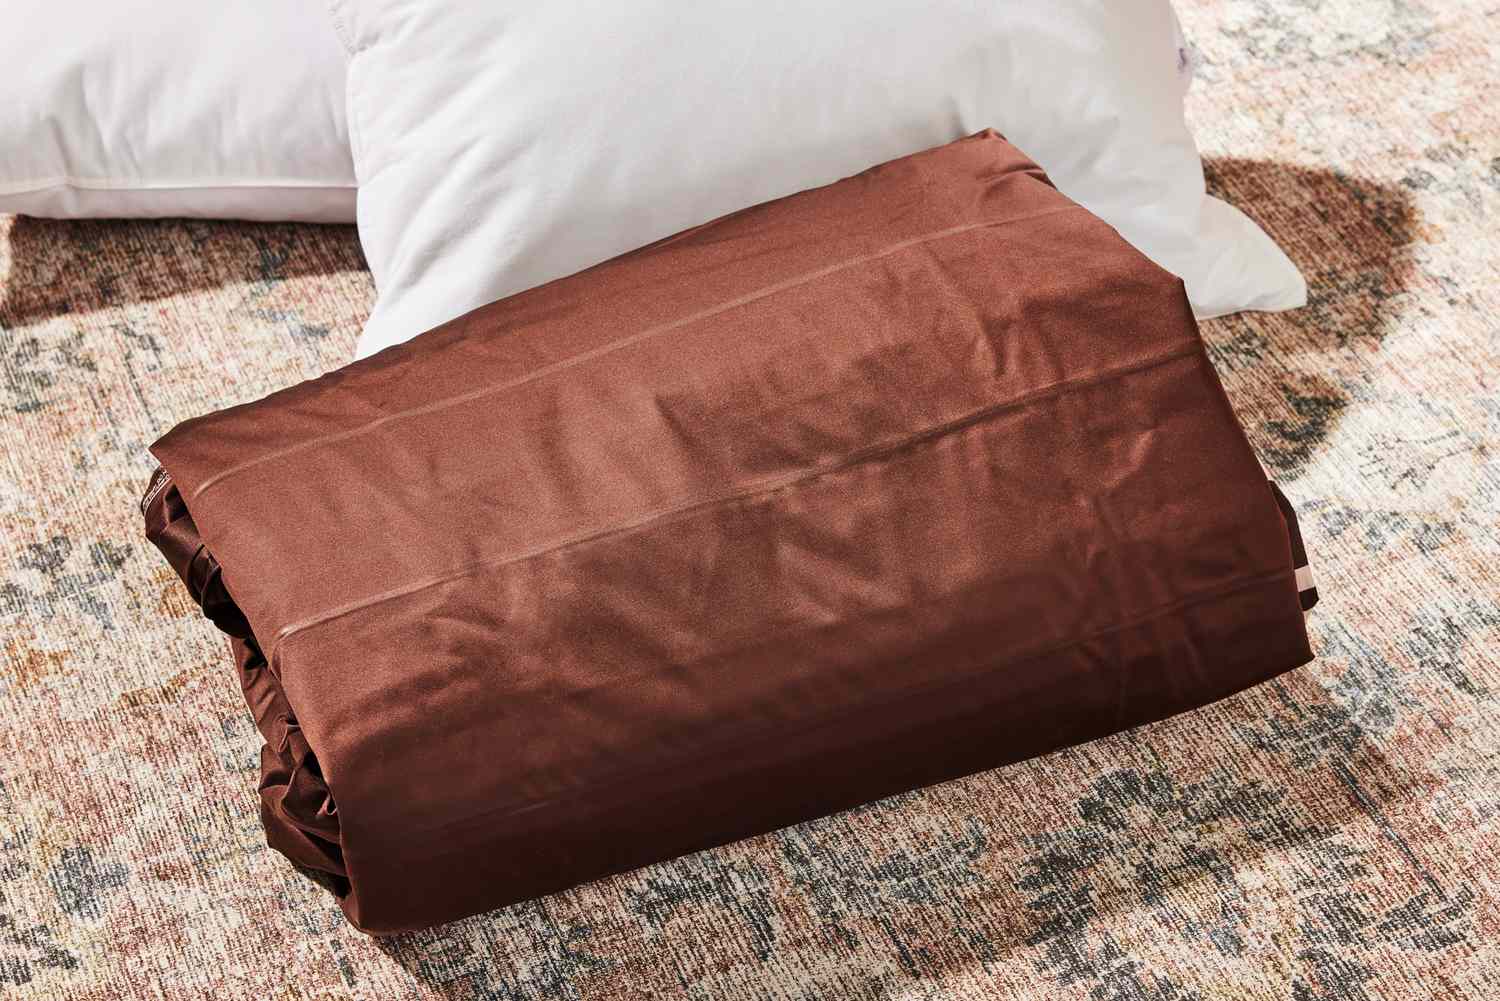 The Englander Air Mattress folded up on a rug